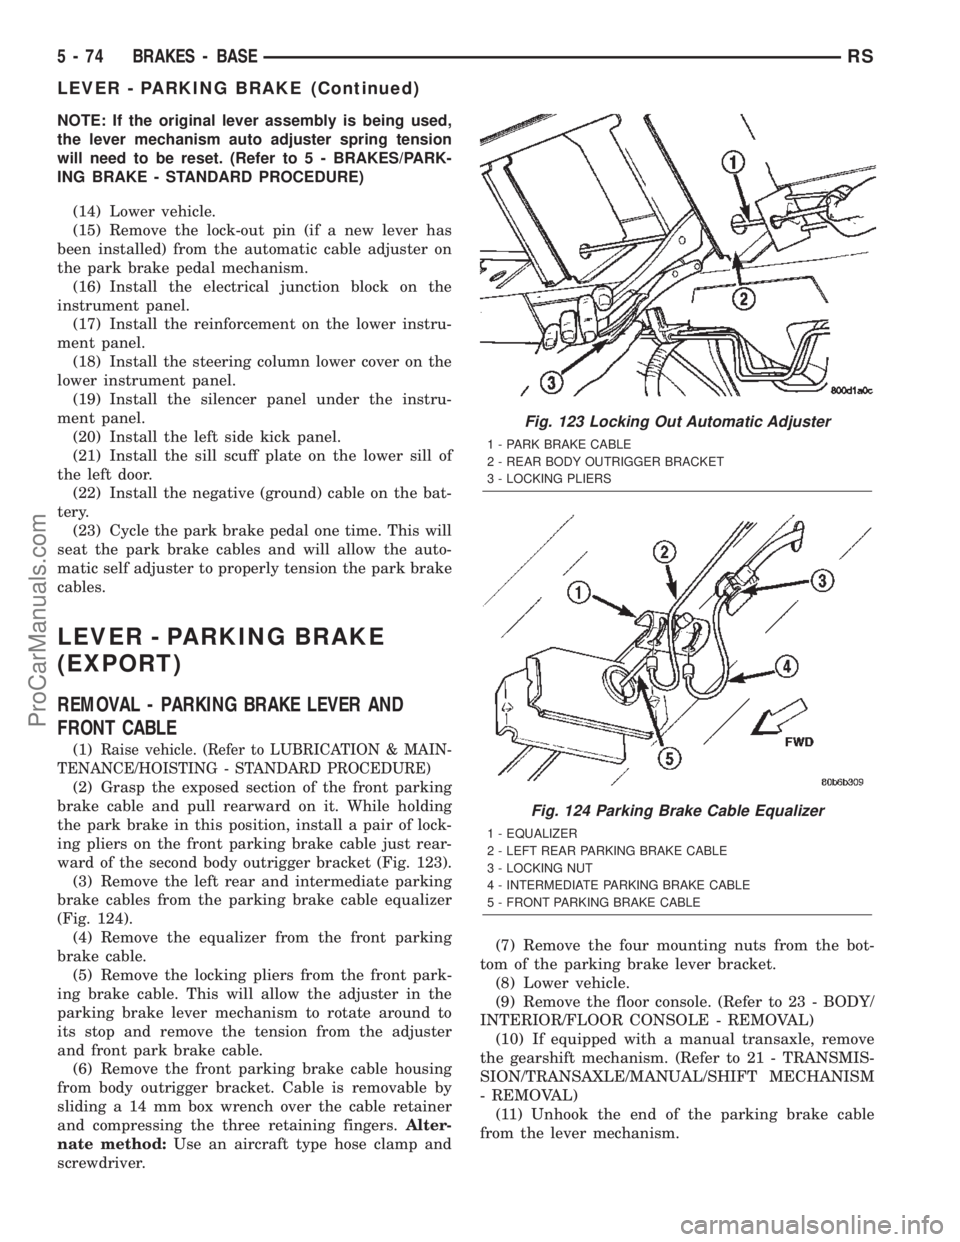 CHRYSLER VOYAGER 2002  Service Manual NOTE: If the original lever assembly is being used,
the lever mechanism auto adjuster spring tension
will need to be reset. (Refer to 5 - BRAKES/PARK-
ING BRAKE - STANDARD PROCEDURE)
(14) Lower vehicl